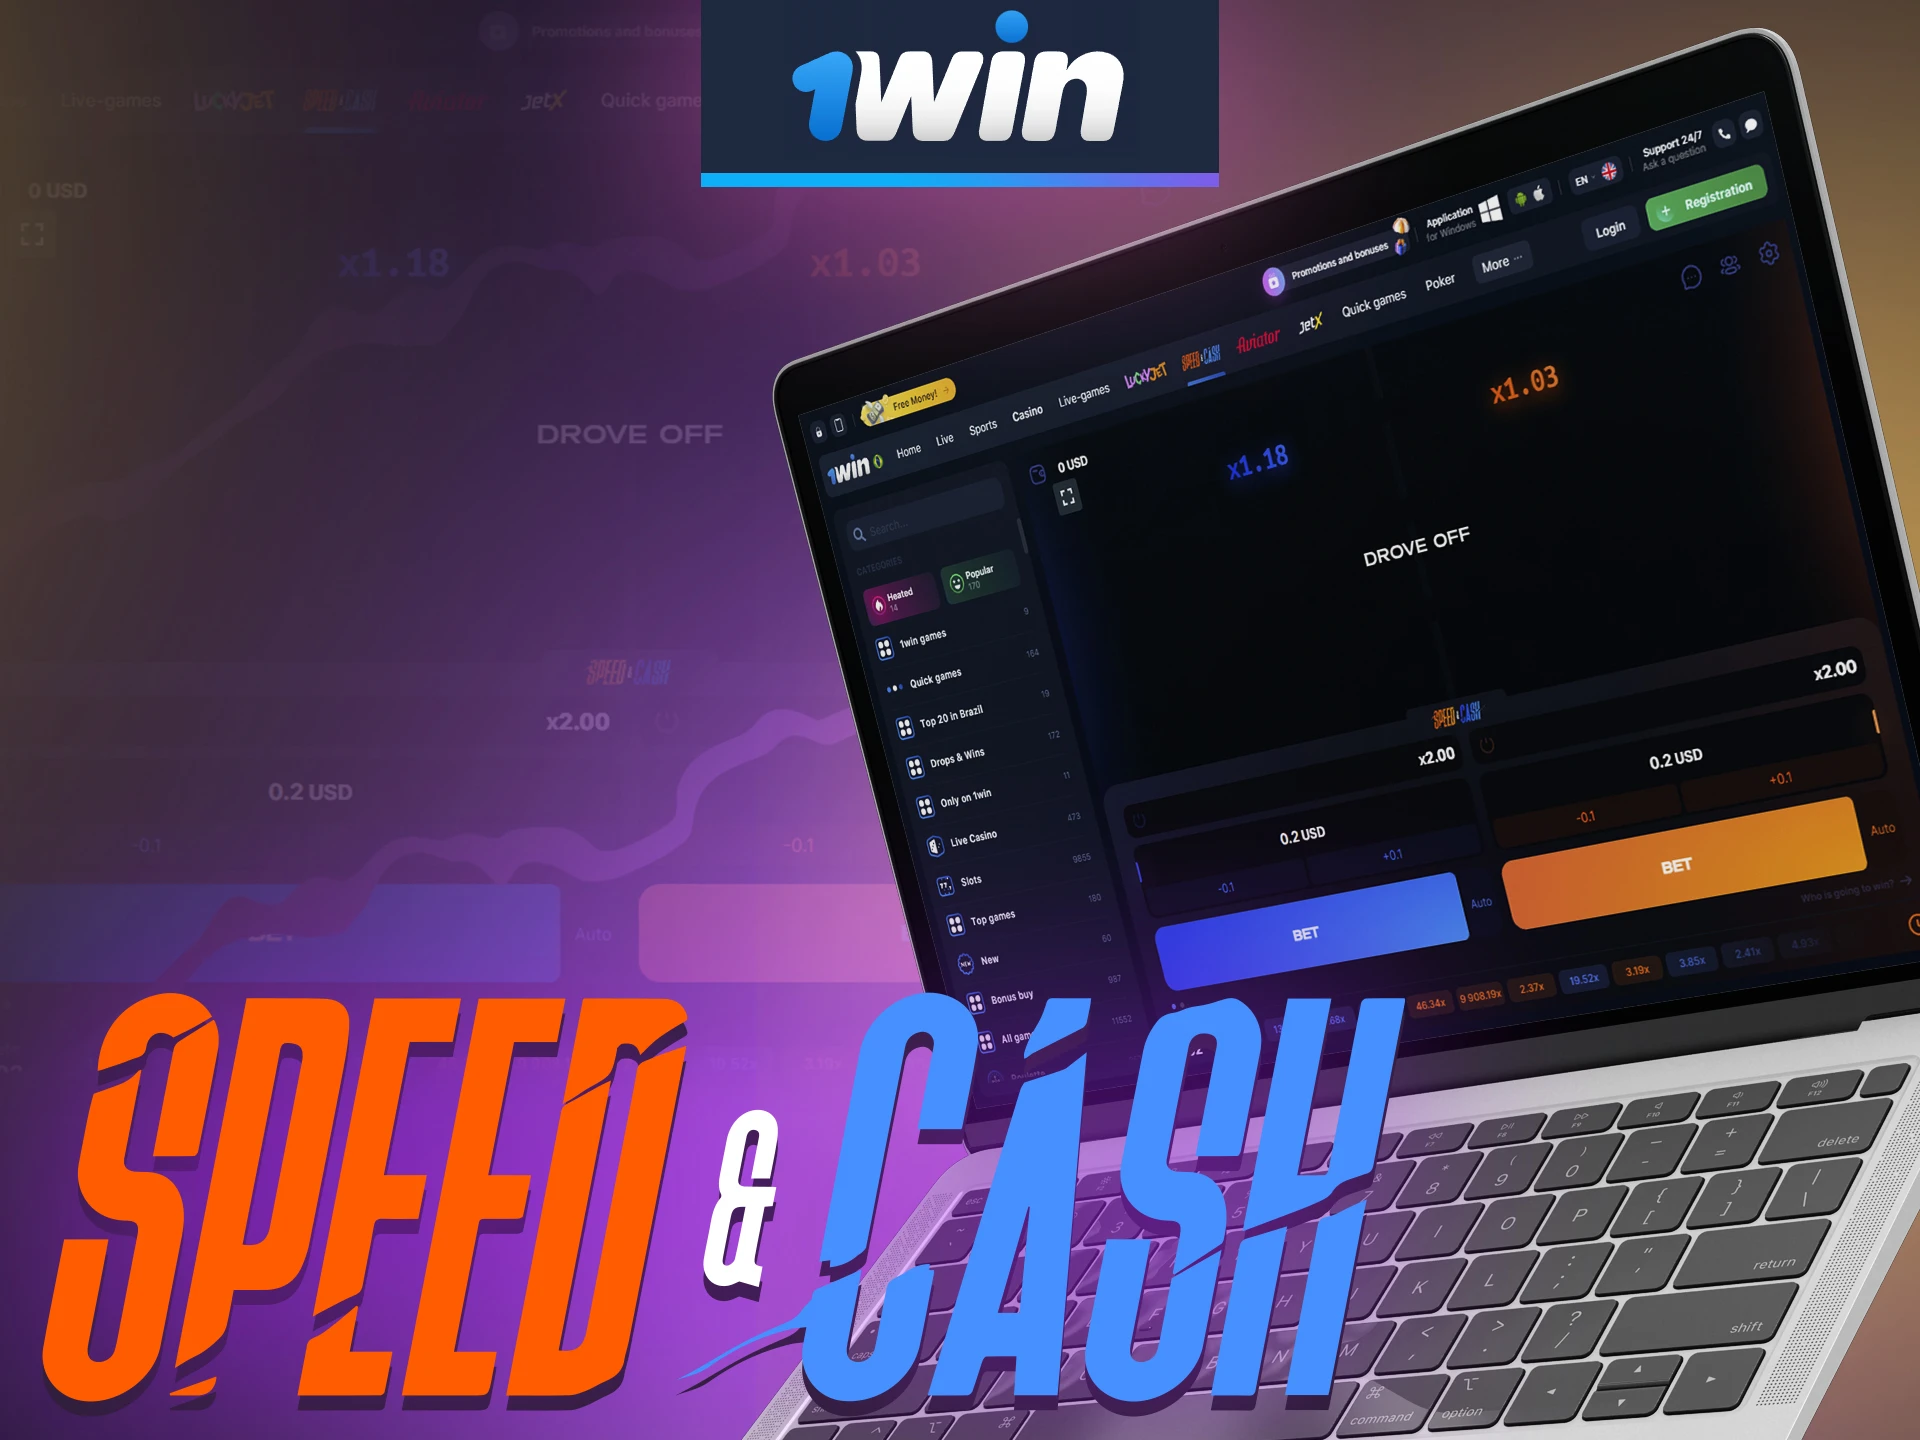 Play the game Speed and Cash on 1win.